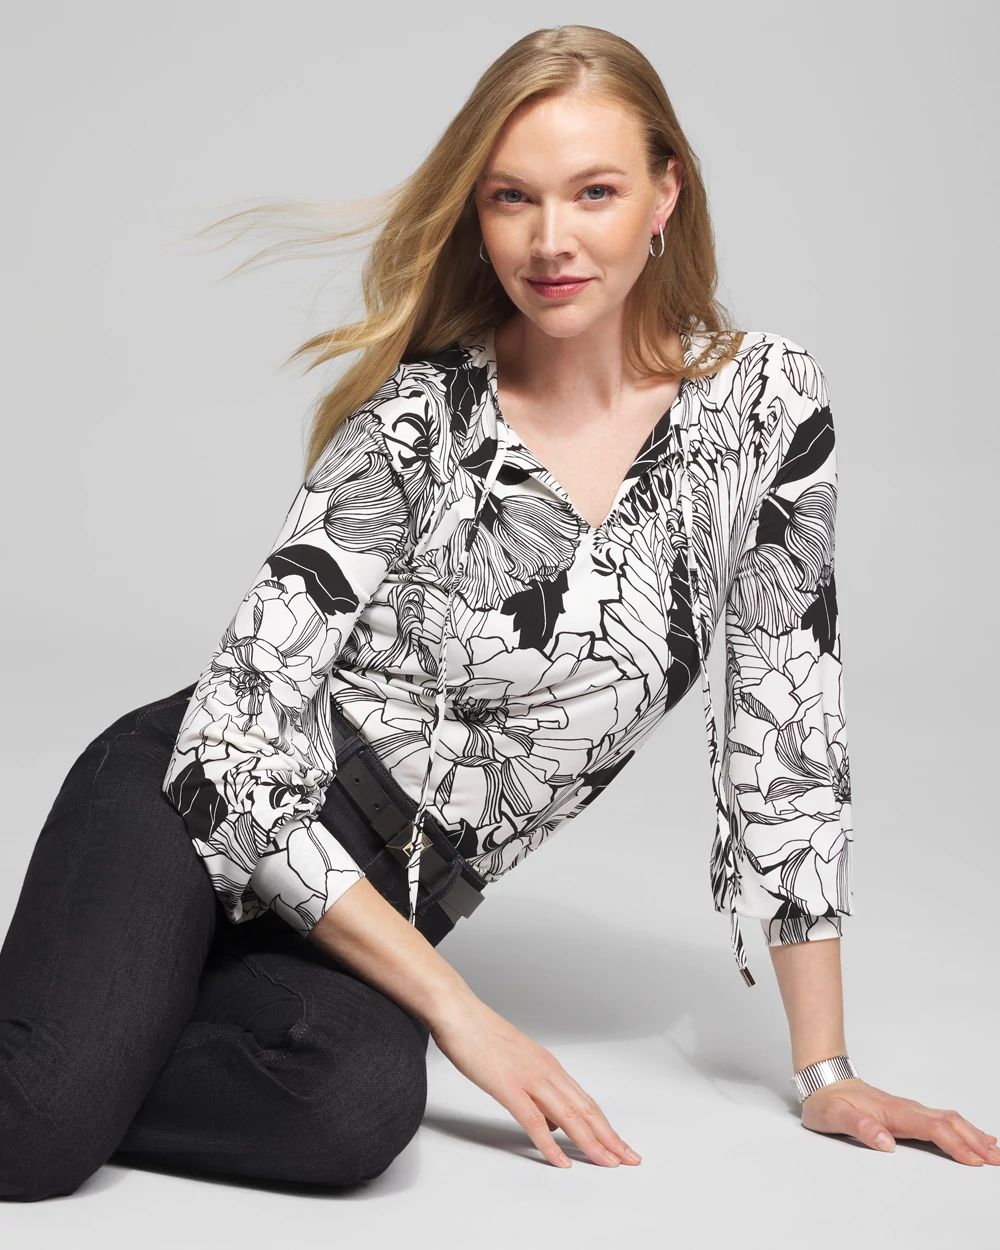 Outlet WHBM Notch Neck Top click to view larger image.